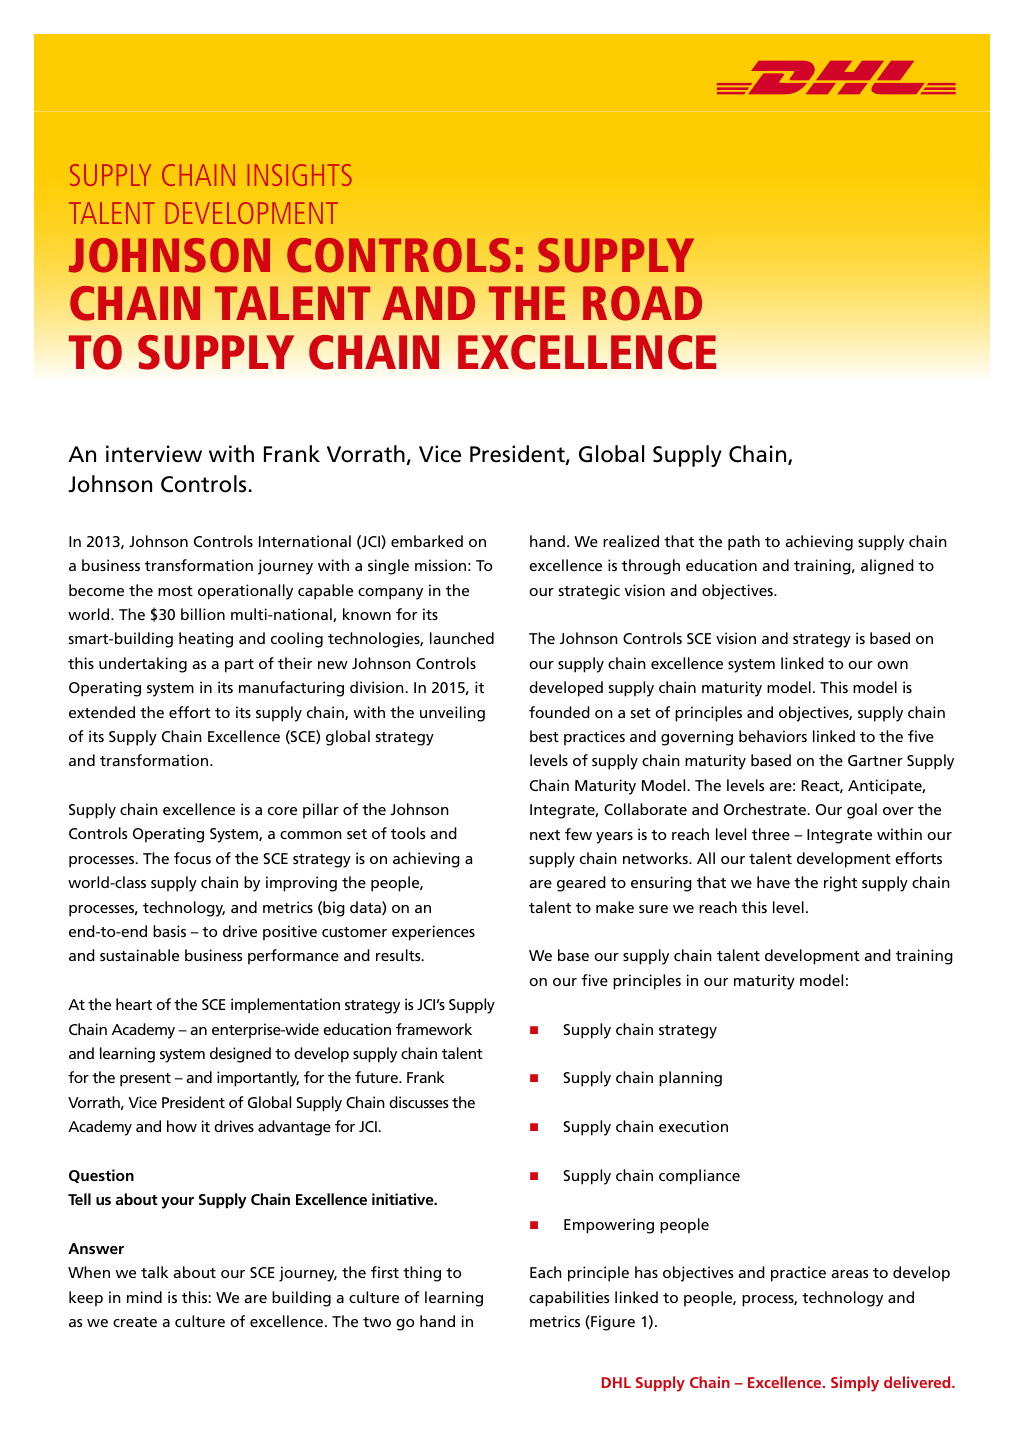 Article Q&A Johnson Controls’ journey to supply chain excellence